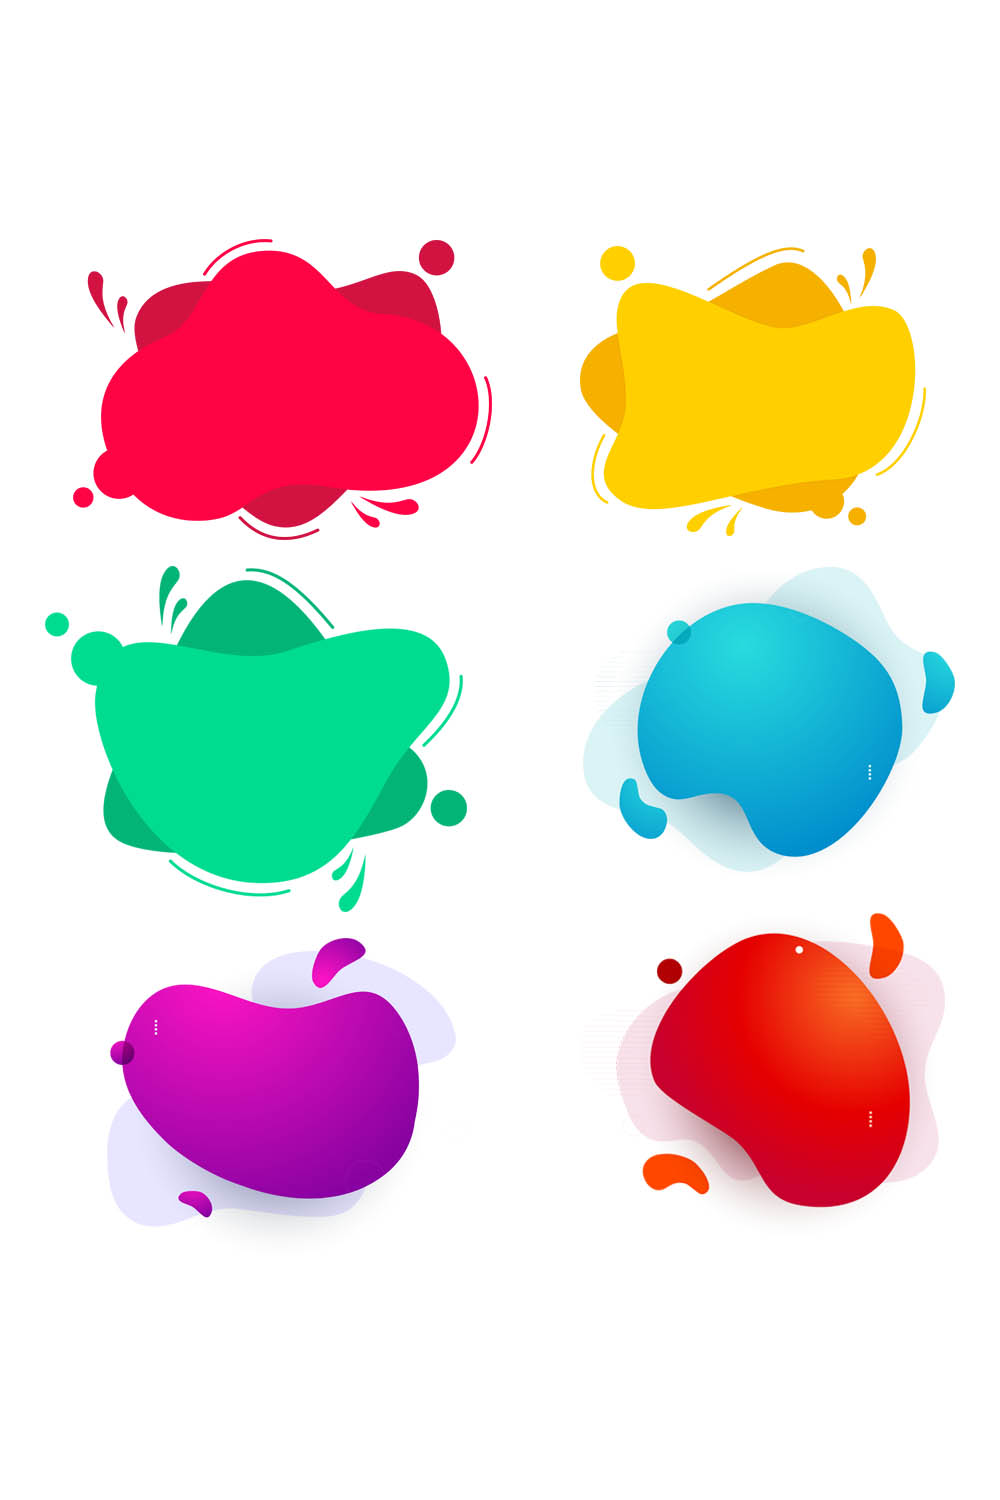 colored graphic banners with flowing fluid shapes pinterest preview image.